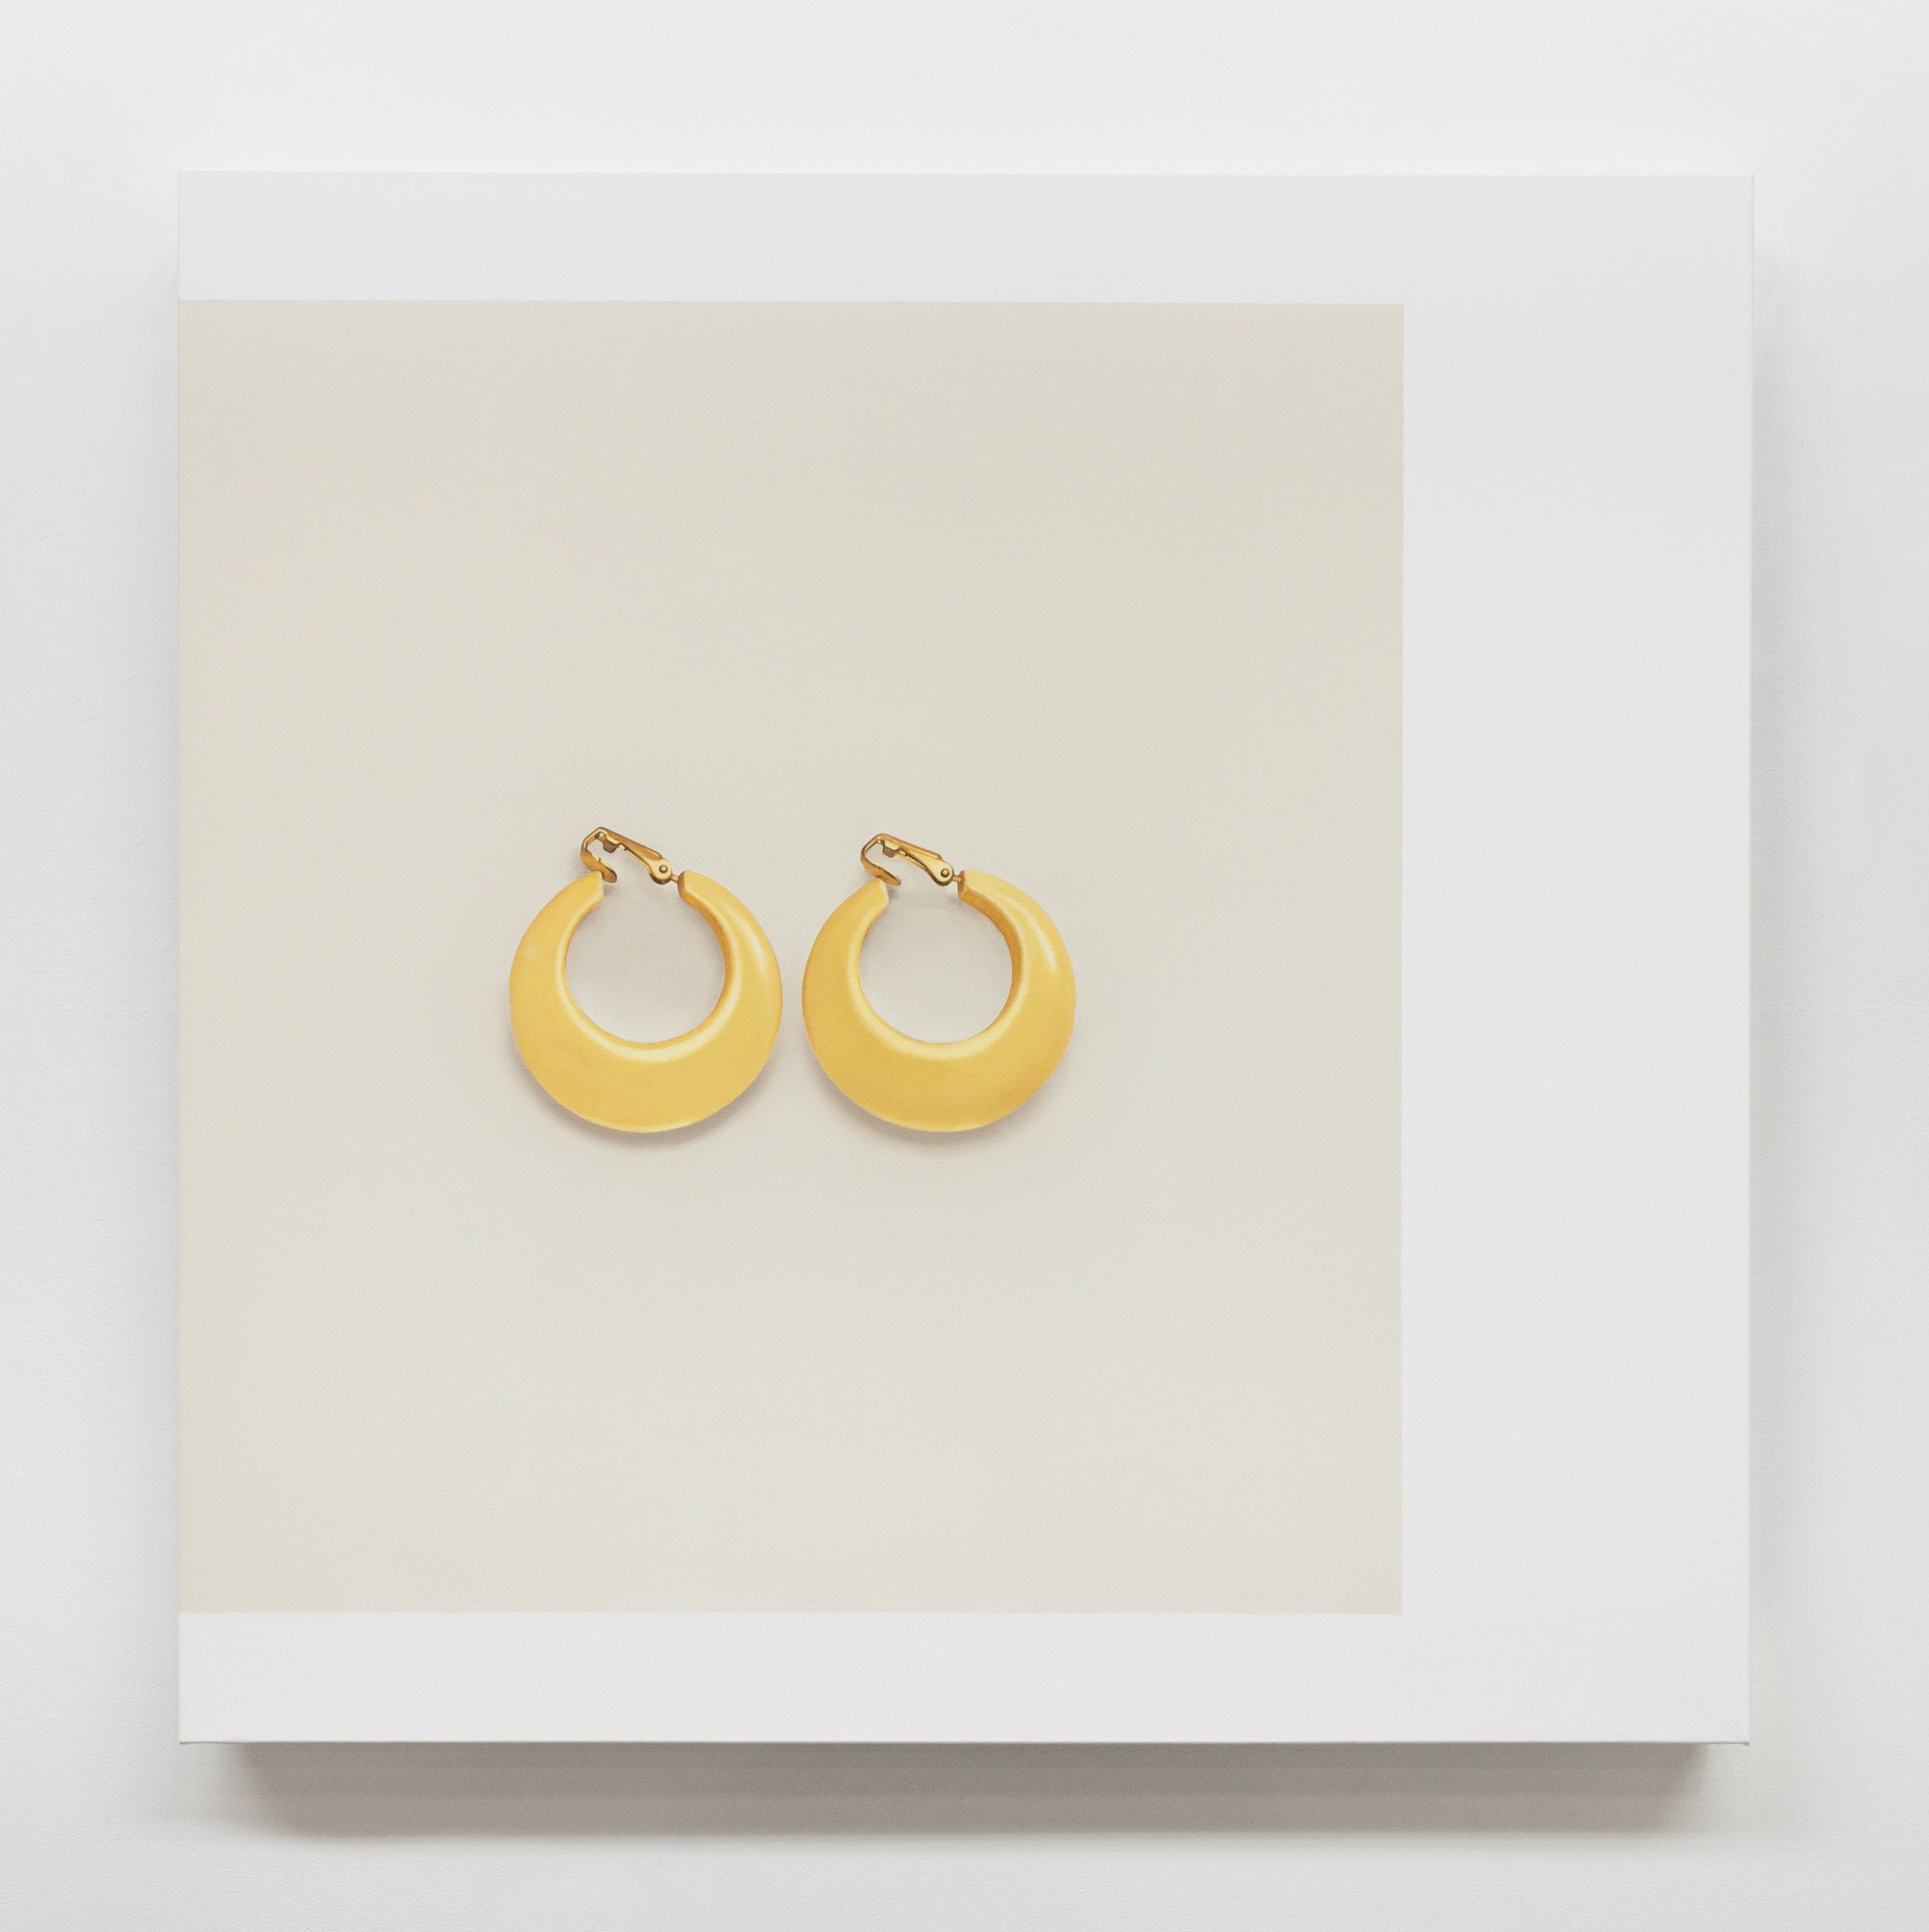 • 492 A PAIR OF SIMULATED IVORY EARCLIPS, (Sotheby's, Sale Code: 6834 “JKO)